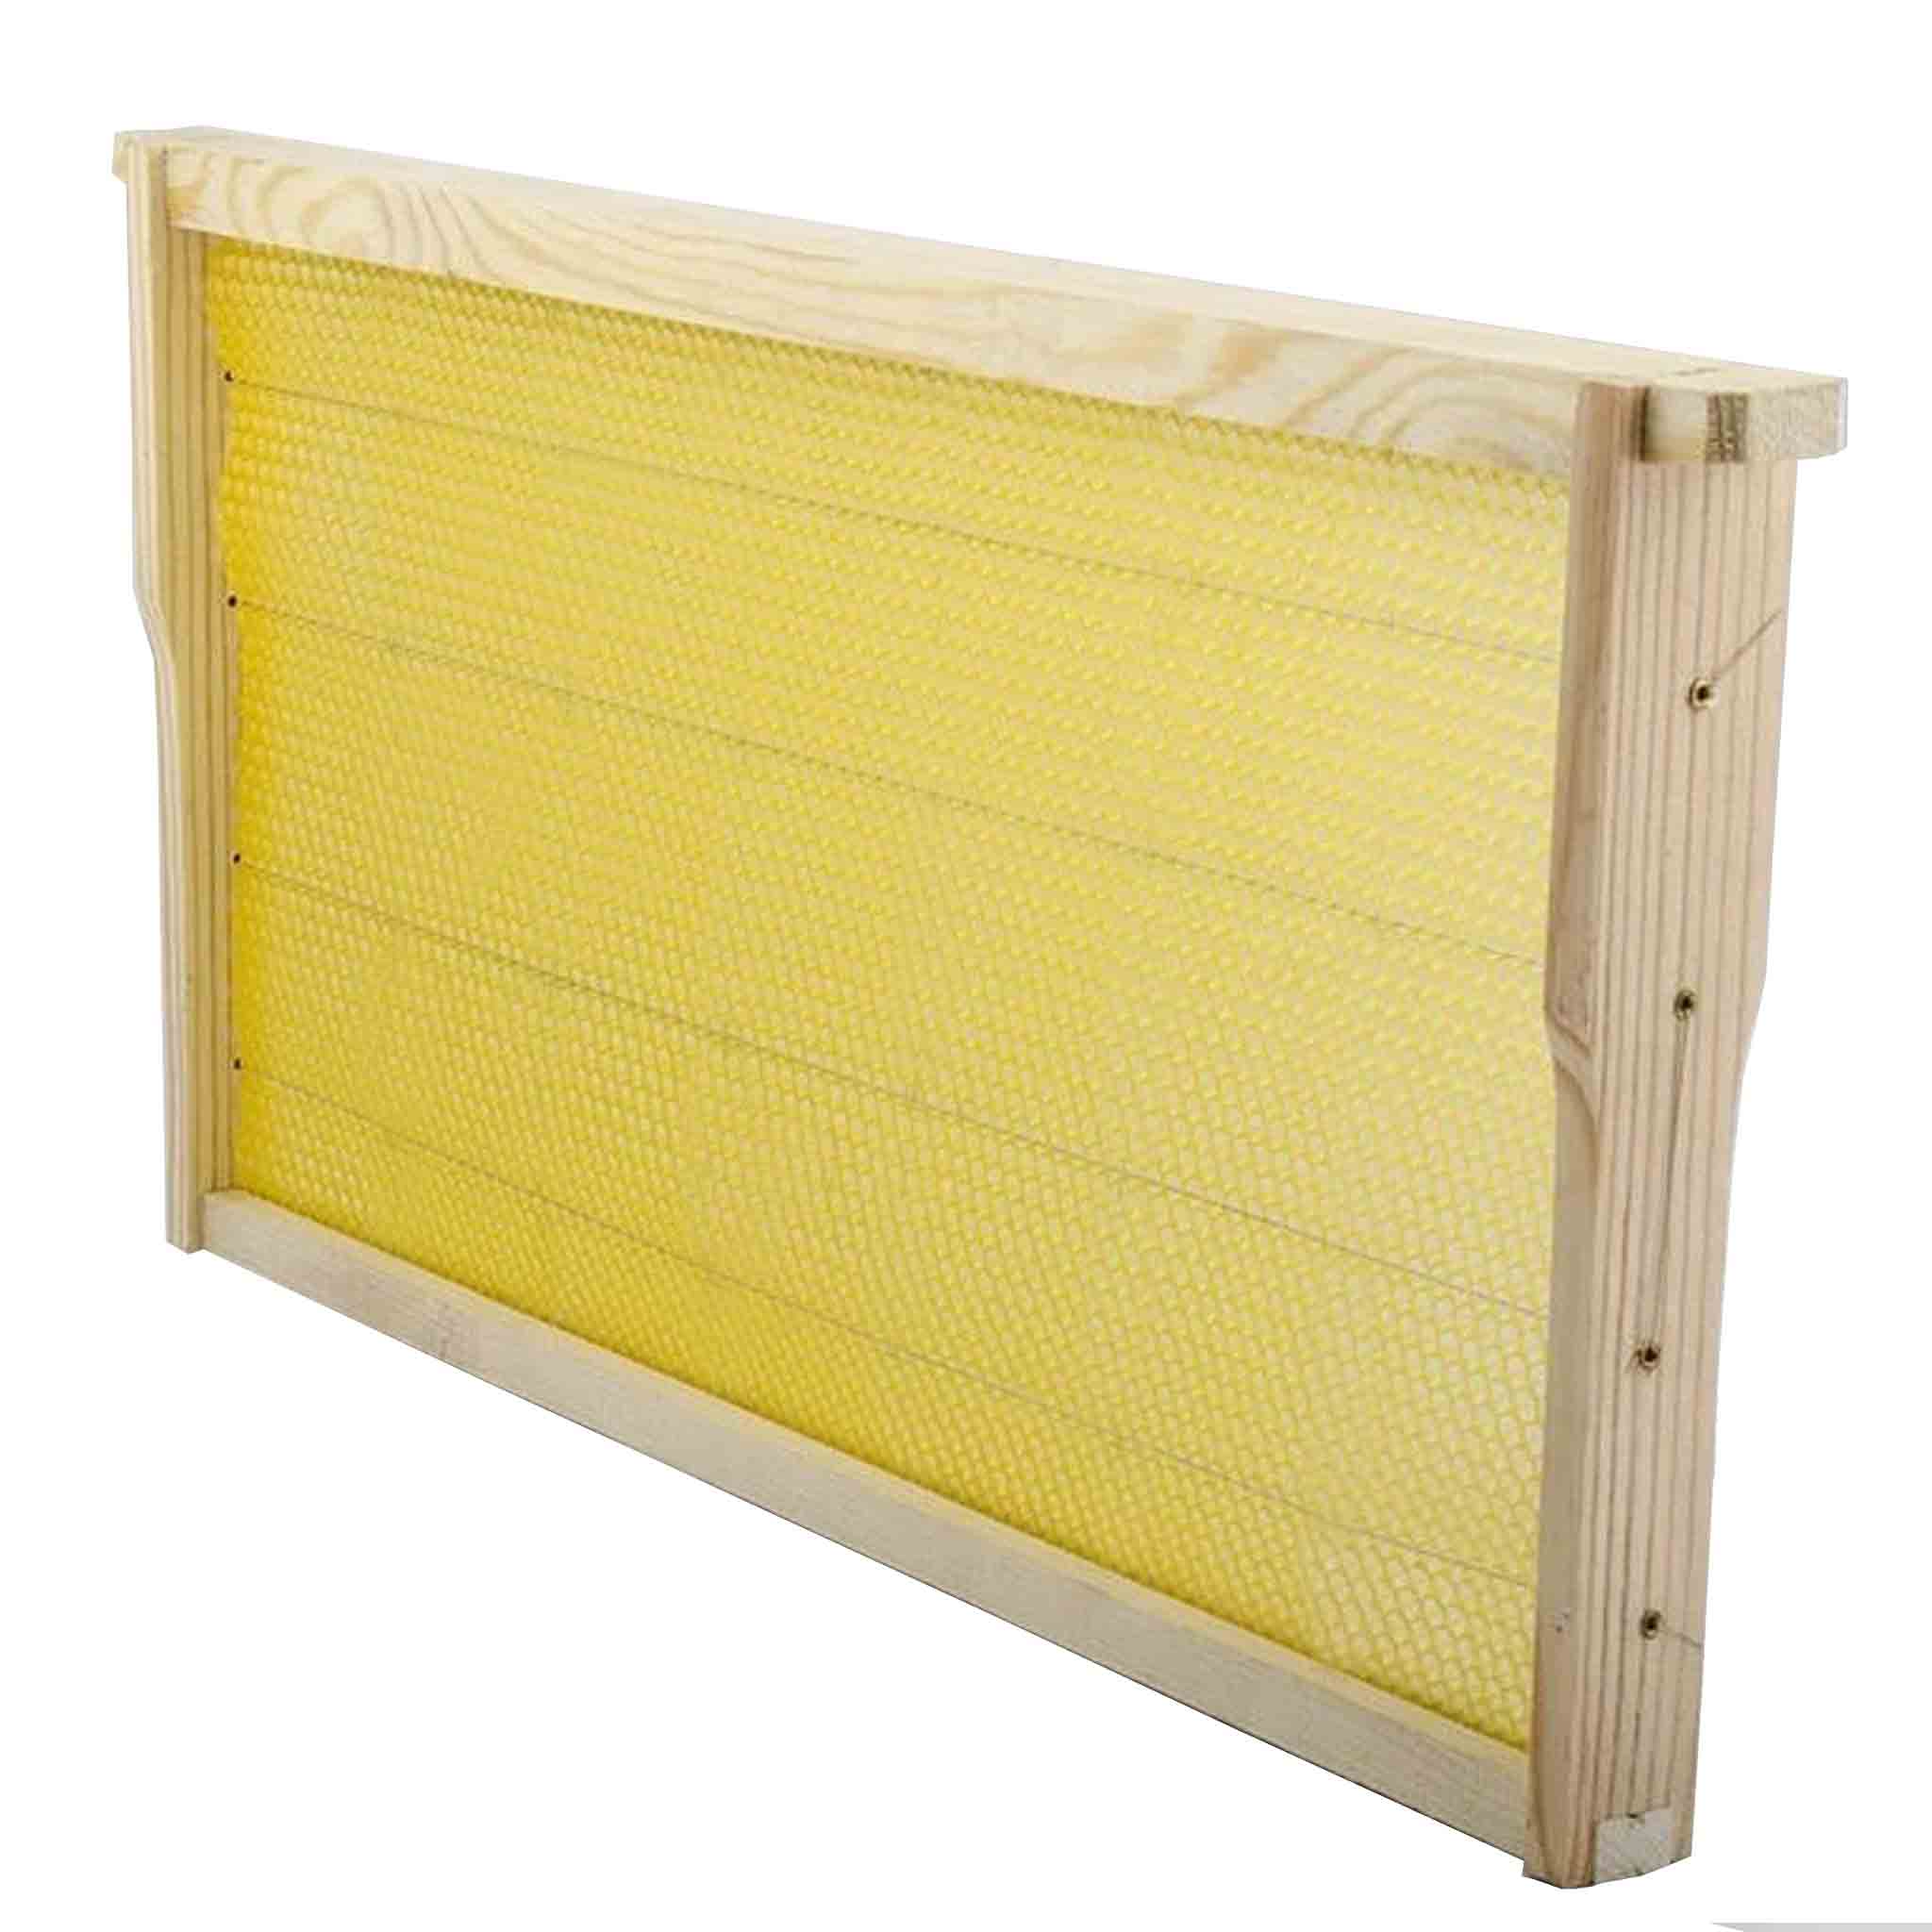 Wooden Frames assembled with Wire and Australian Bees Wax Foundation - Hive Parts collection by Buzzbee Beekeeping Supplies